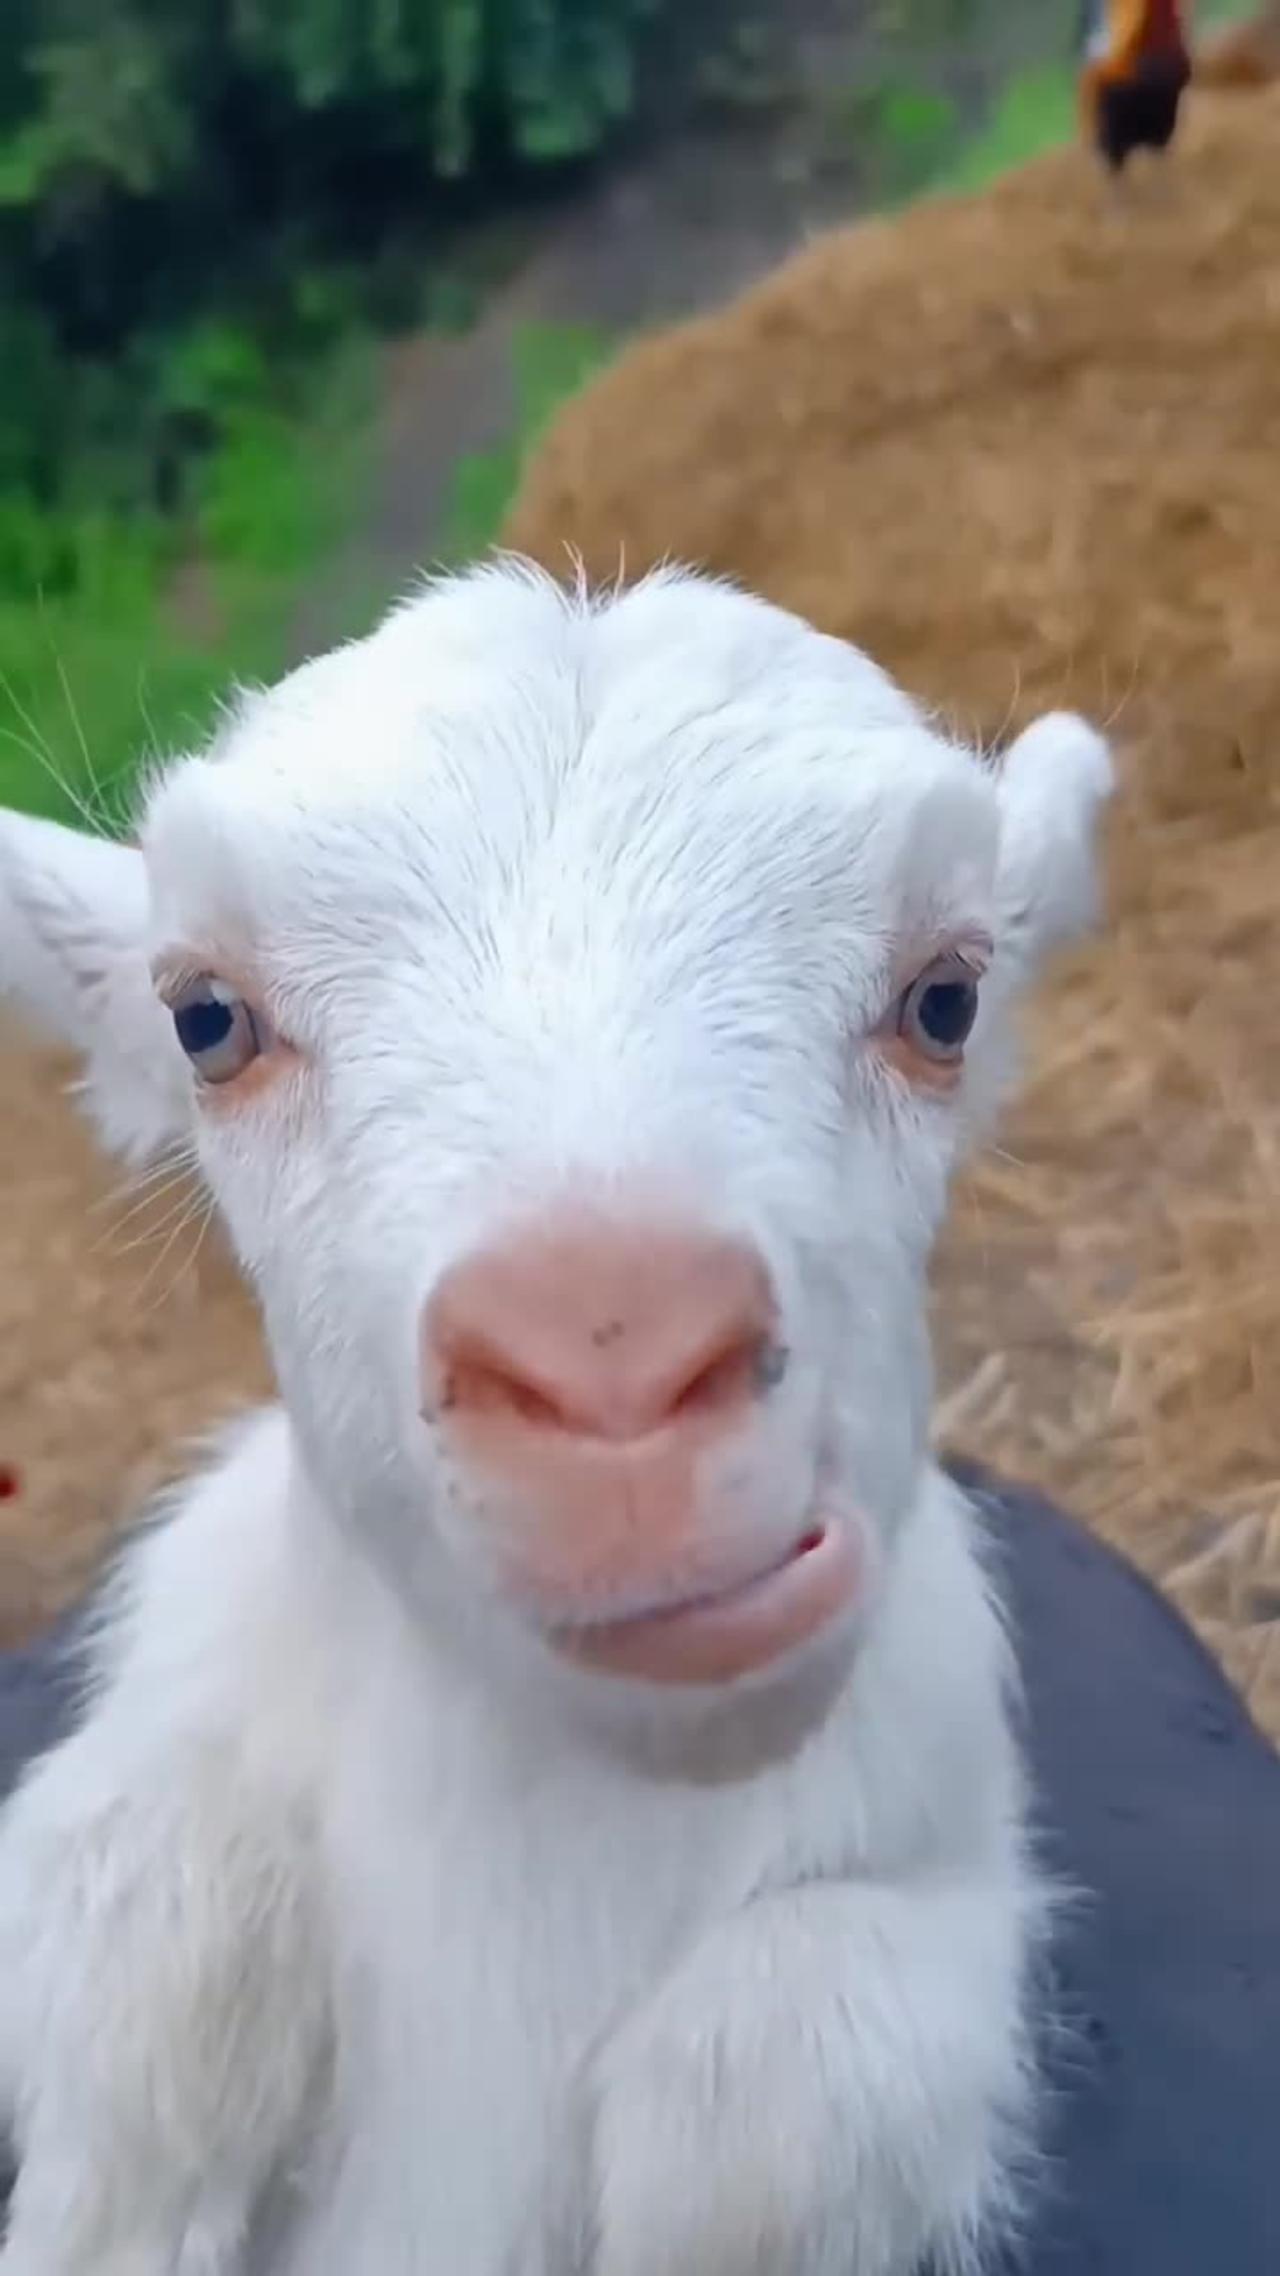 Cute goat funny video 😂😂#goat #shorts #youtube #cute #reels #funny #viral #baby #bakri #funnyvideo